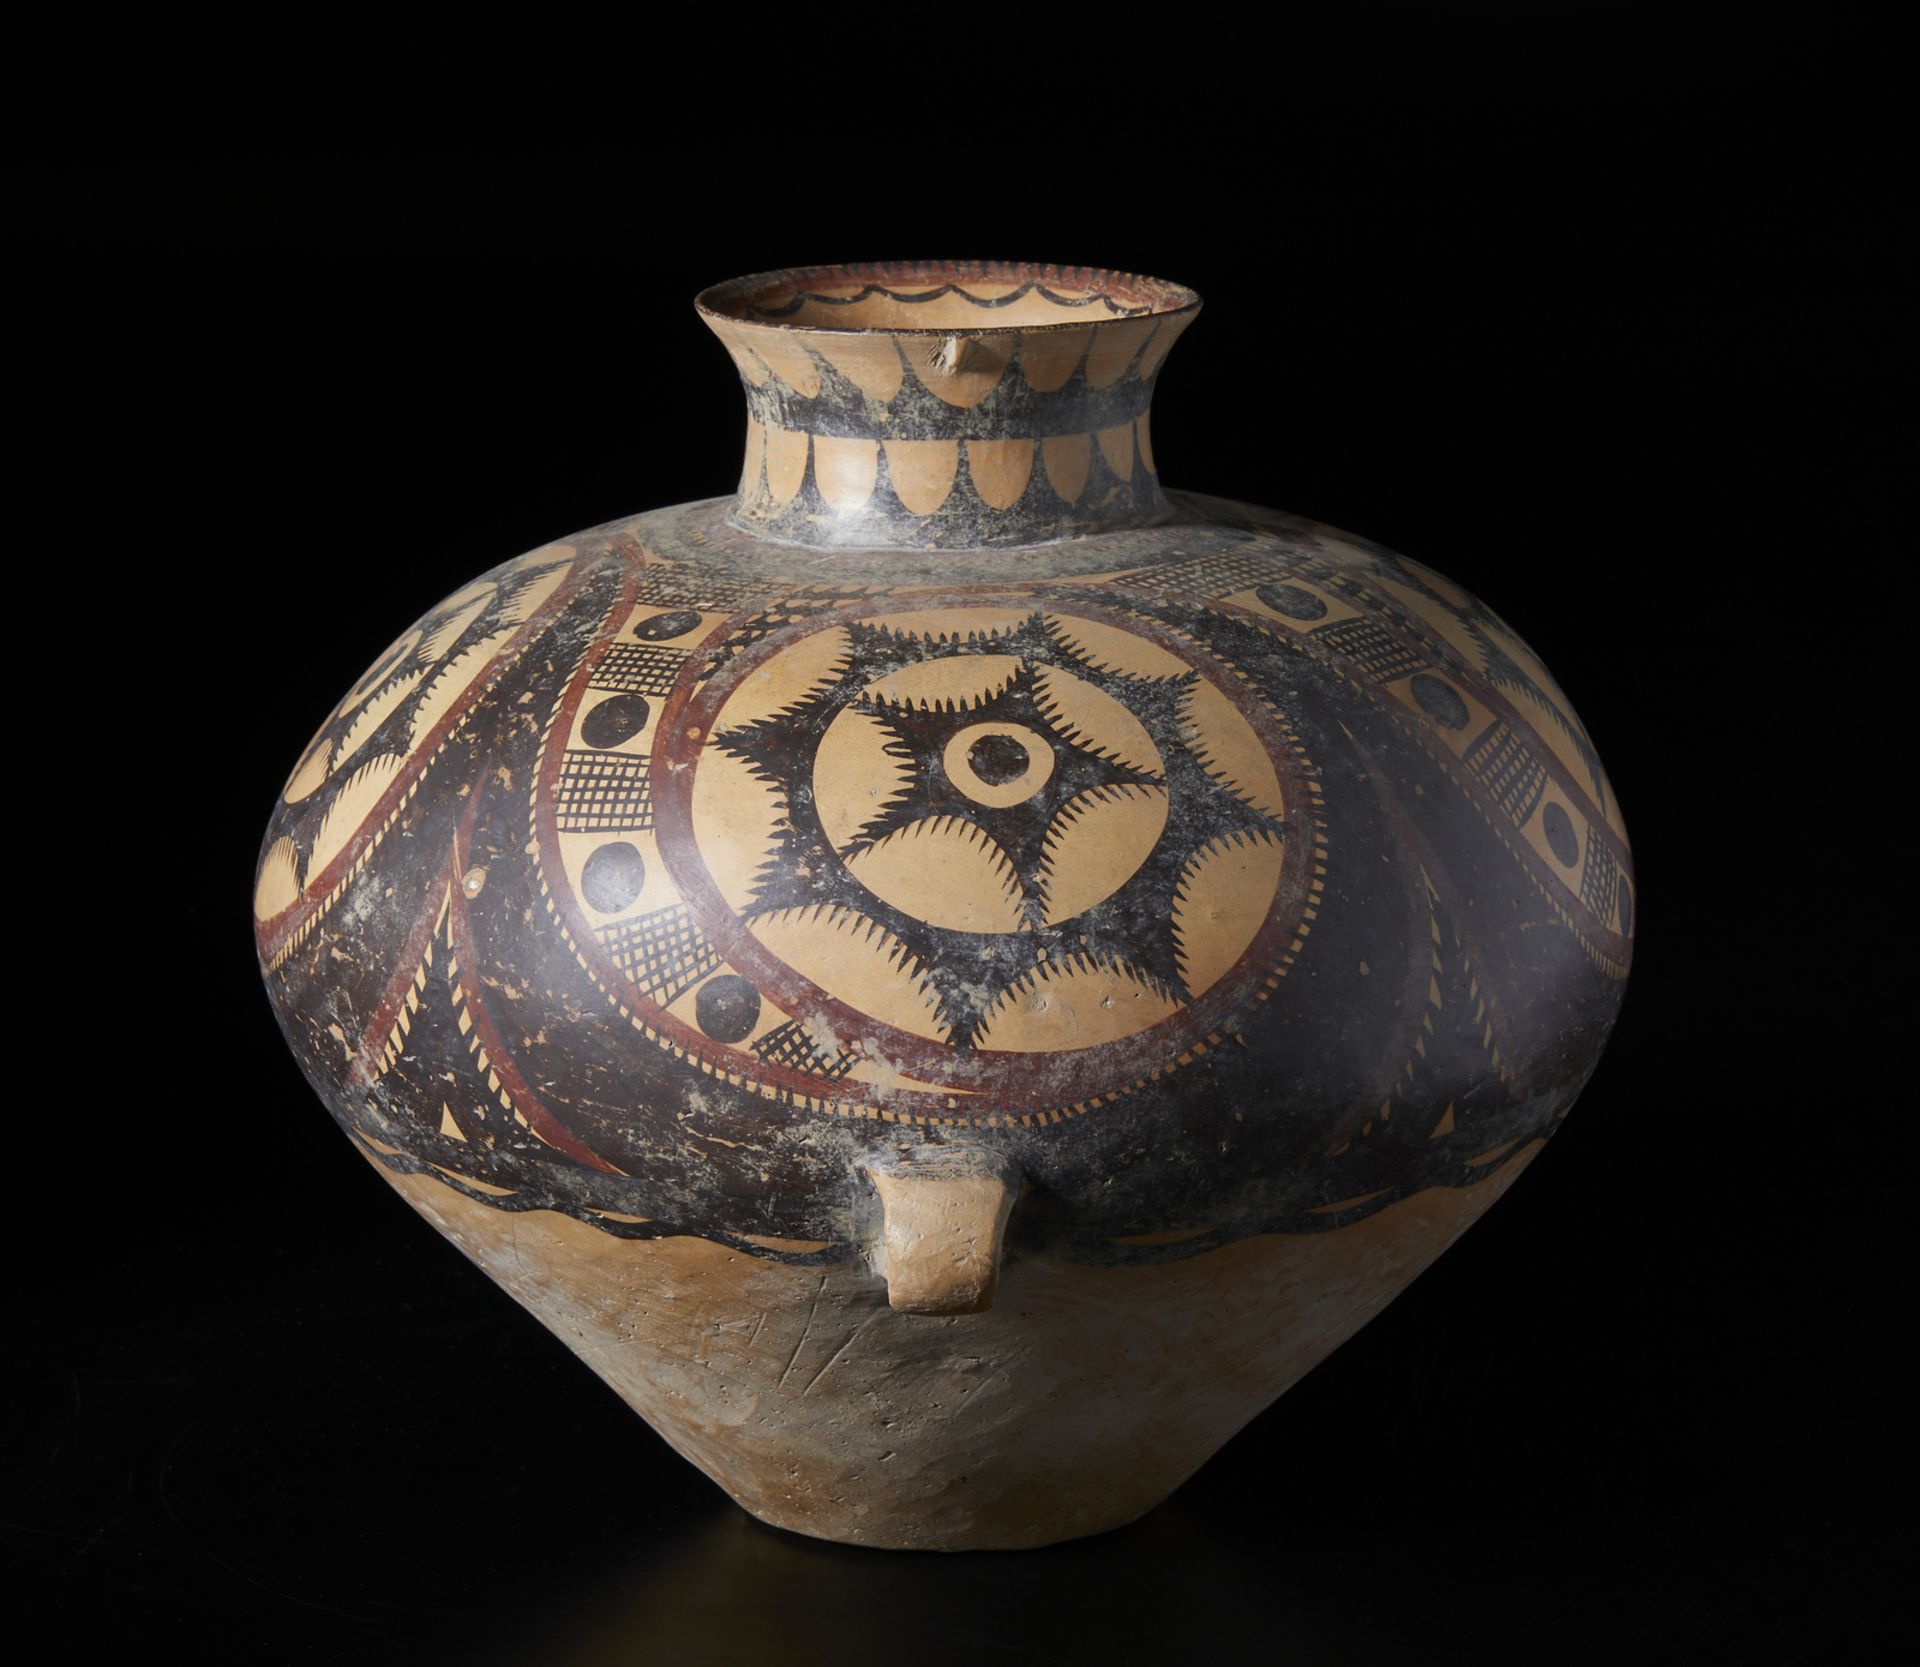 A fine polichrome earthenware jar China, Yangshao culture, 5th-6th millenium bCCm 37,50 x 32,00 - Image 2 of 5